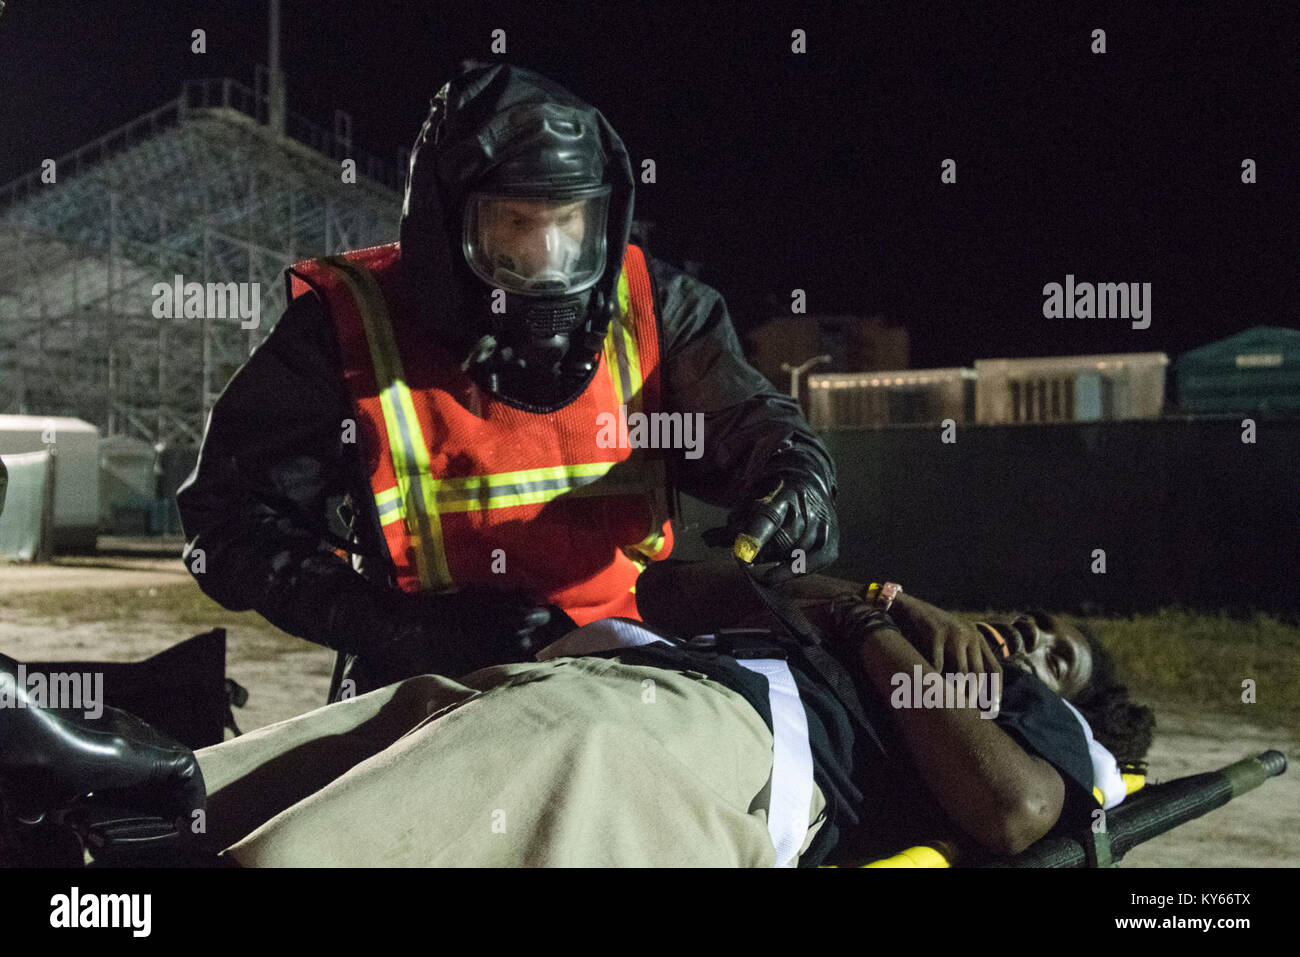 U.S. Army Soldier exanimate simulated casualties during a Mass Casualty Decontamination exercise at the Homestead-Miami Speedway, in Miami-Dade, Florida, Jan. 9, 2018. This is the 3rd in a series of joint training exercises between Active Duty, Guard, and Reserve Army units and local municipalities across the United States. This JTE focused on the decontamination and transportation of casualties in a simulated mass chemical attack. (DoD Stock Photo